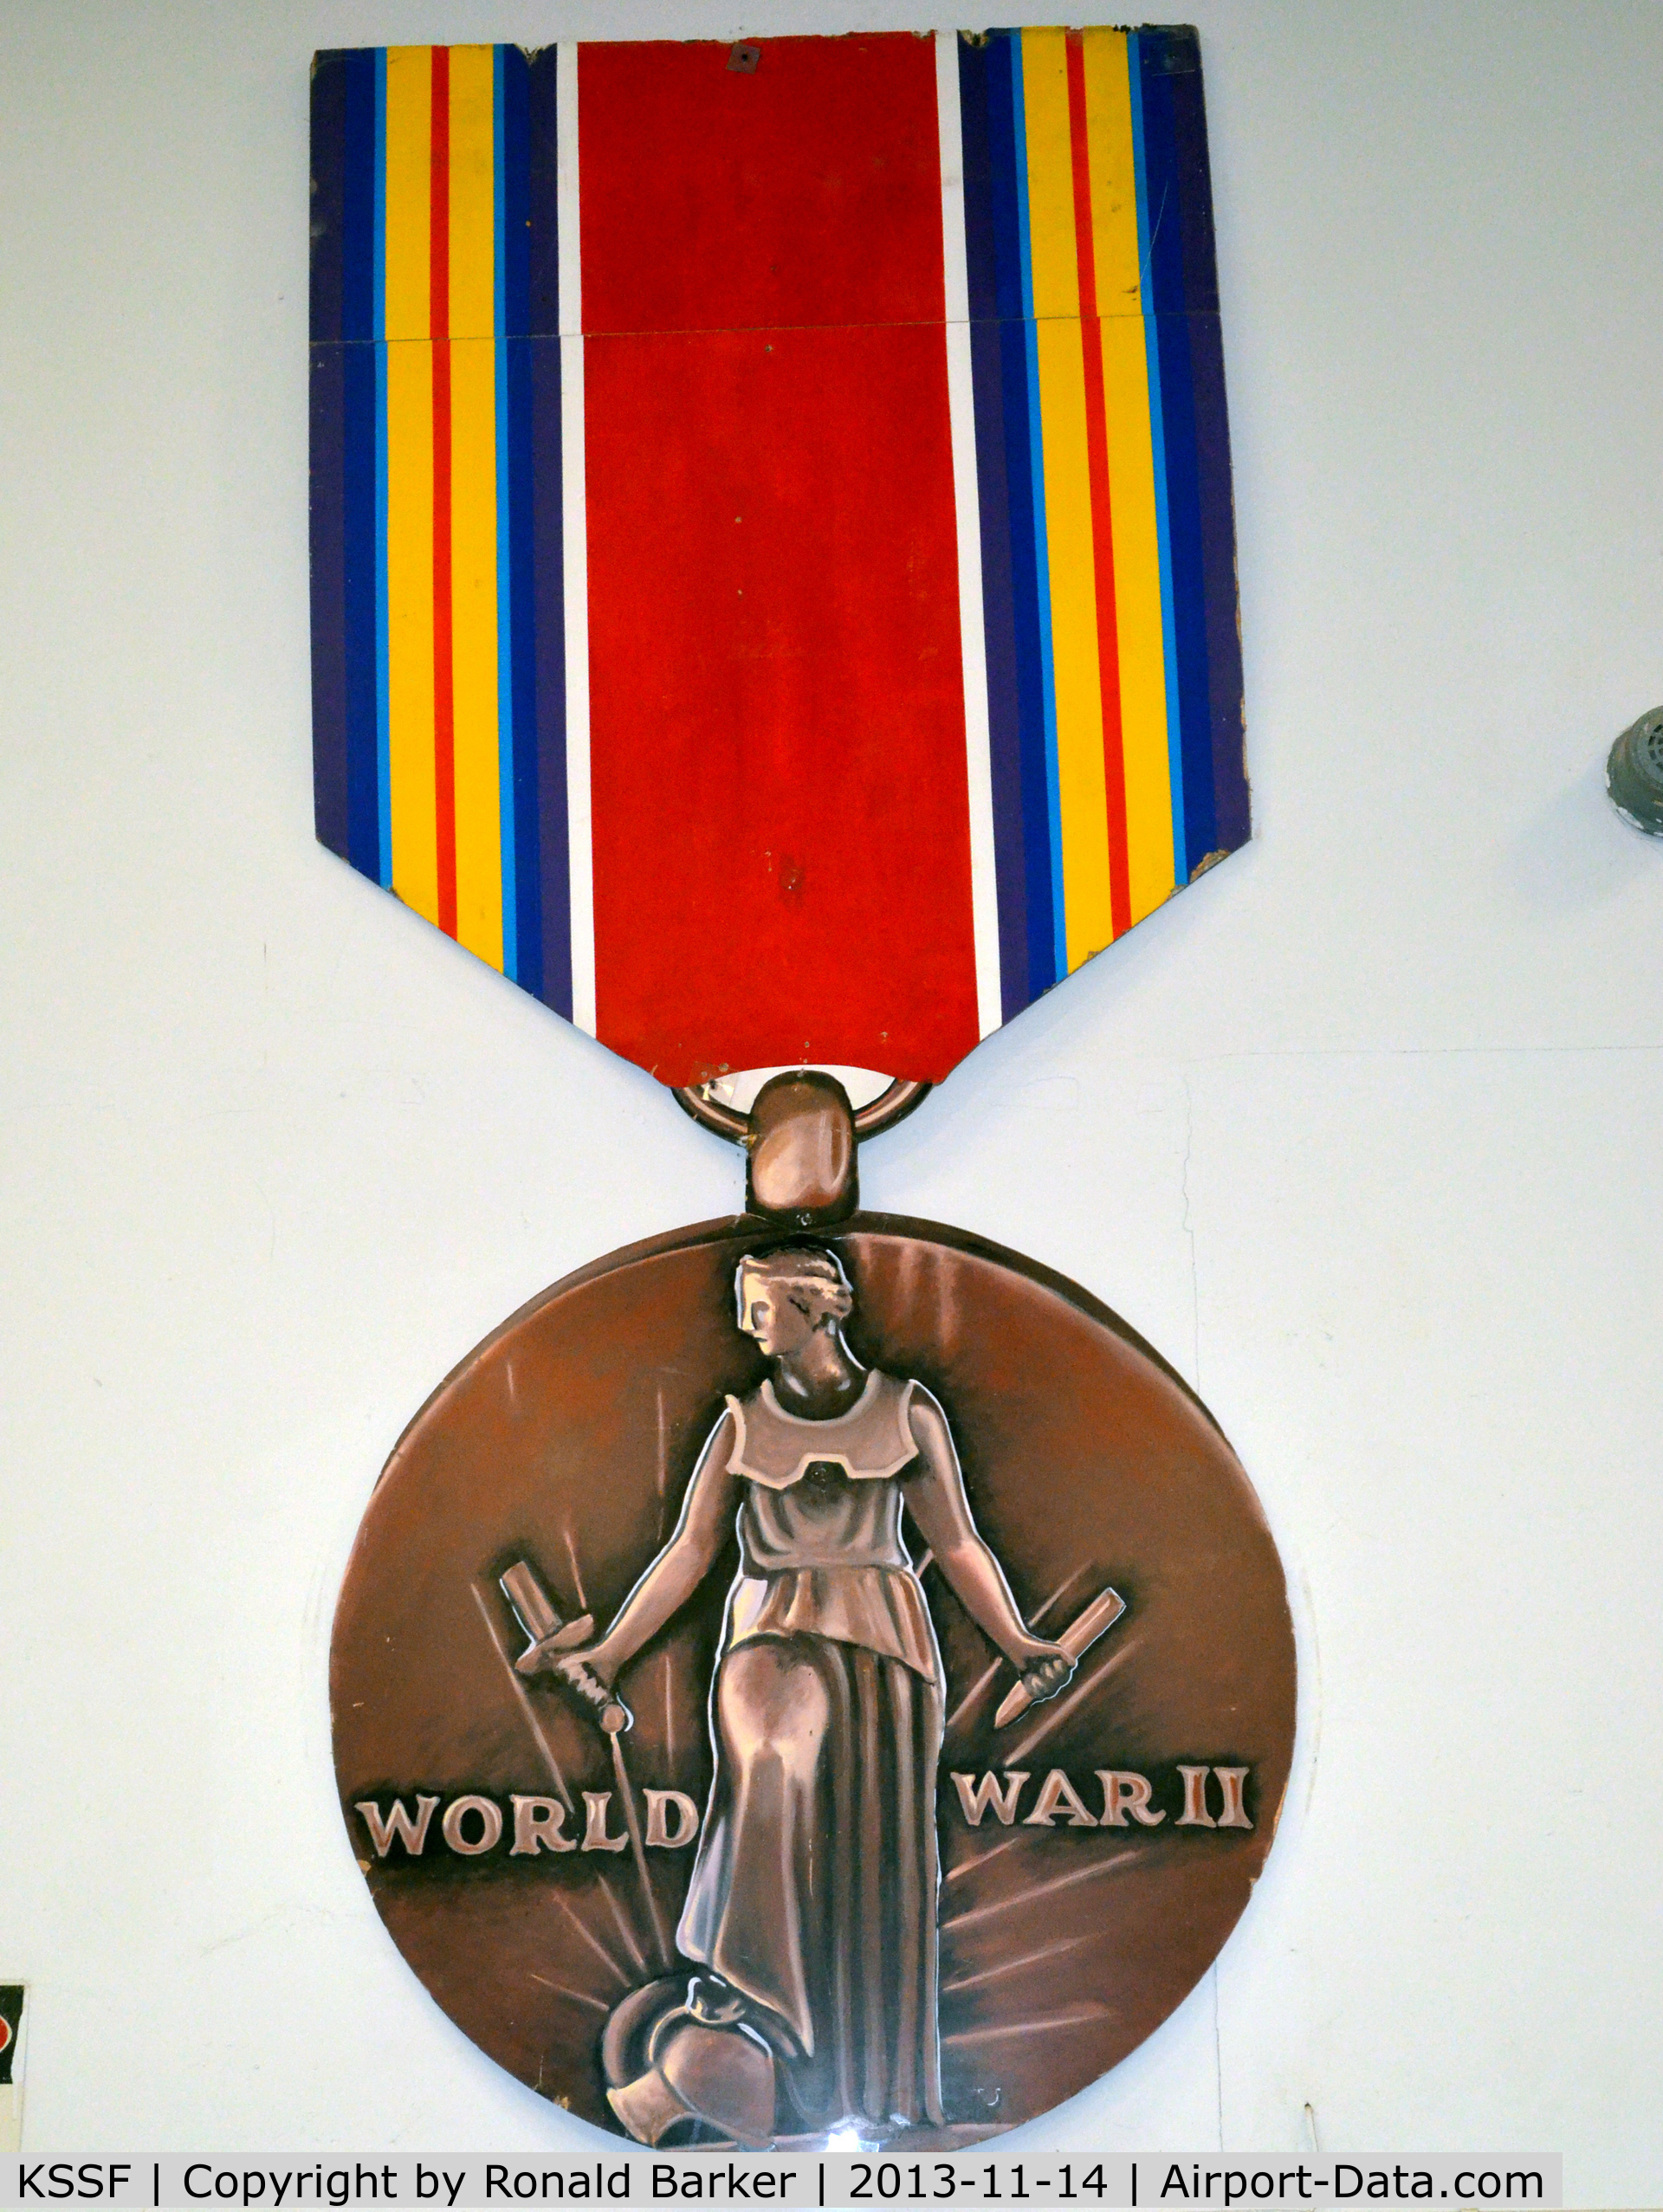 Stinson Municipal Airport (SSF) - Giant size US World War II Victory Medal at the Texas Air Museum